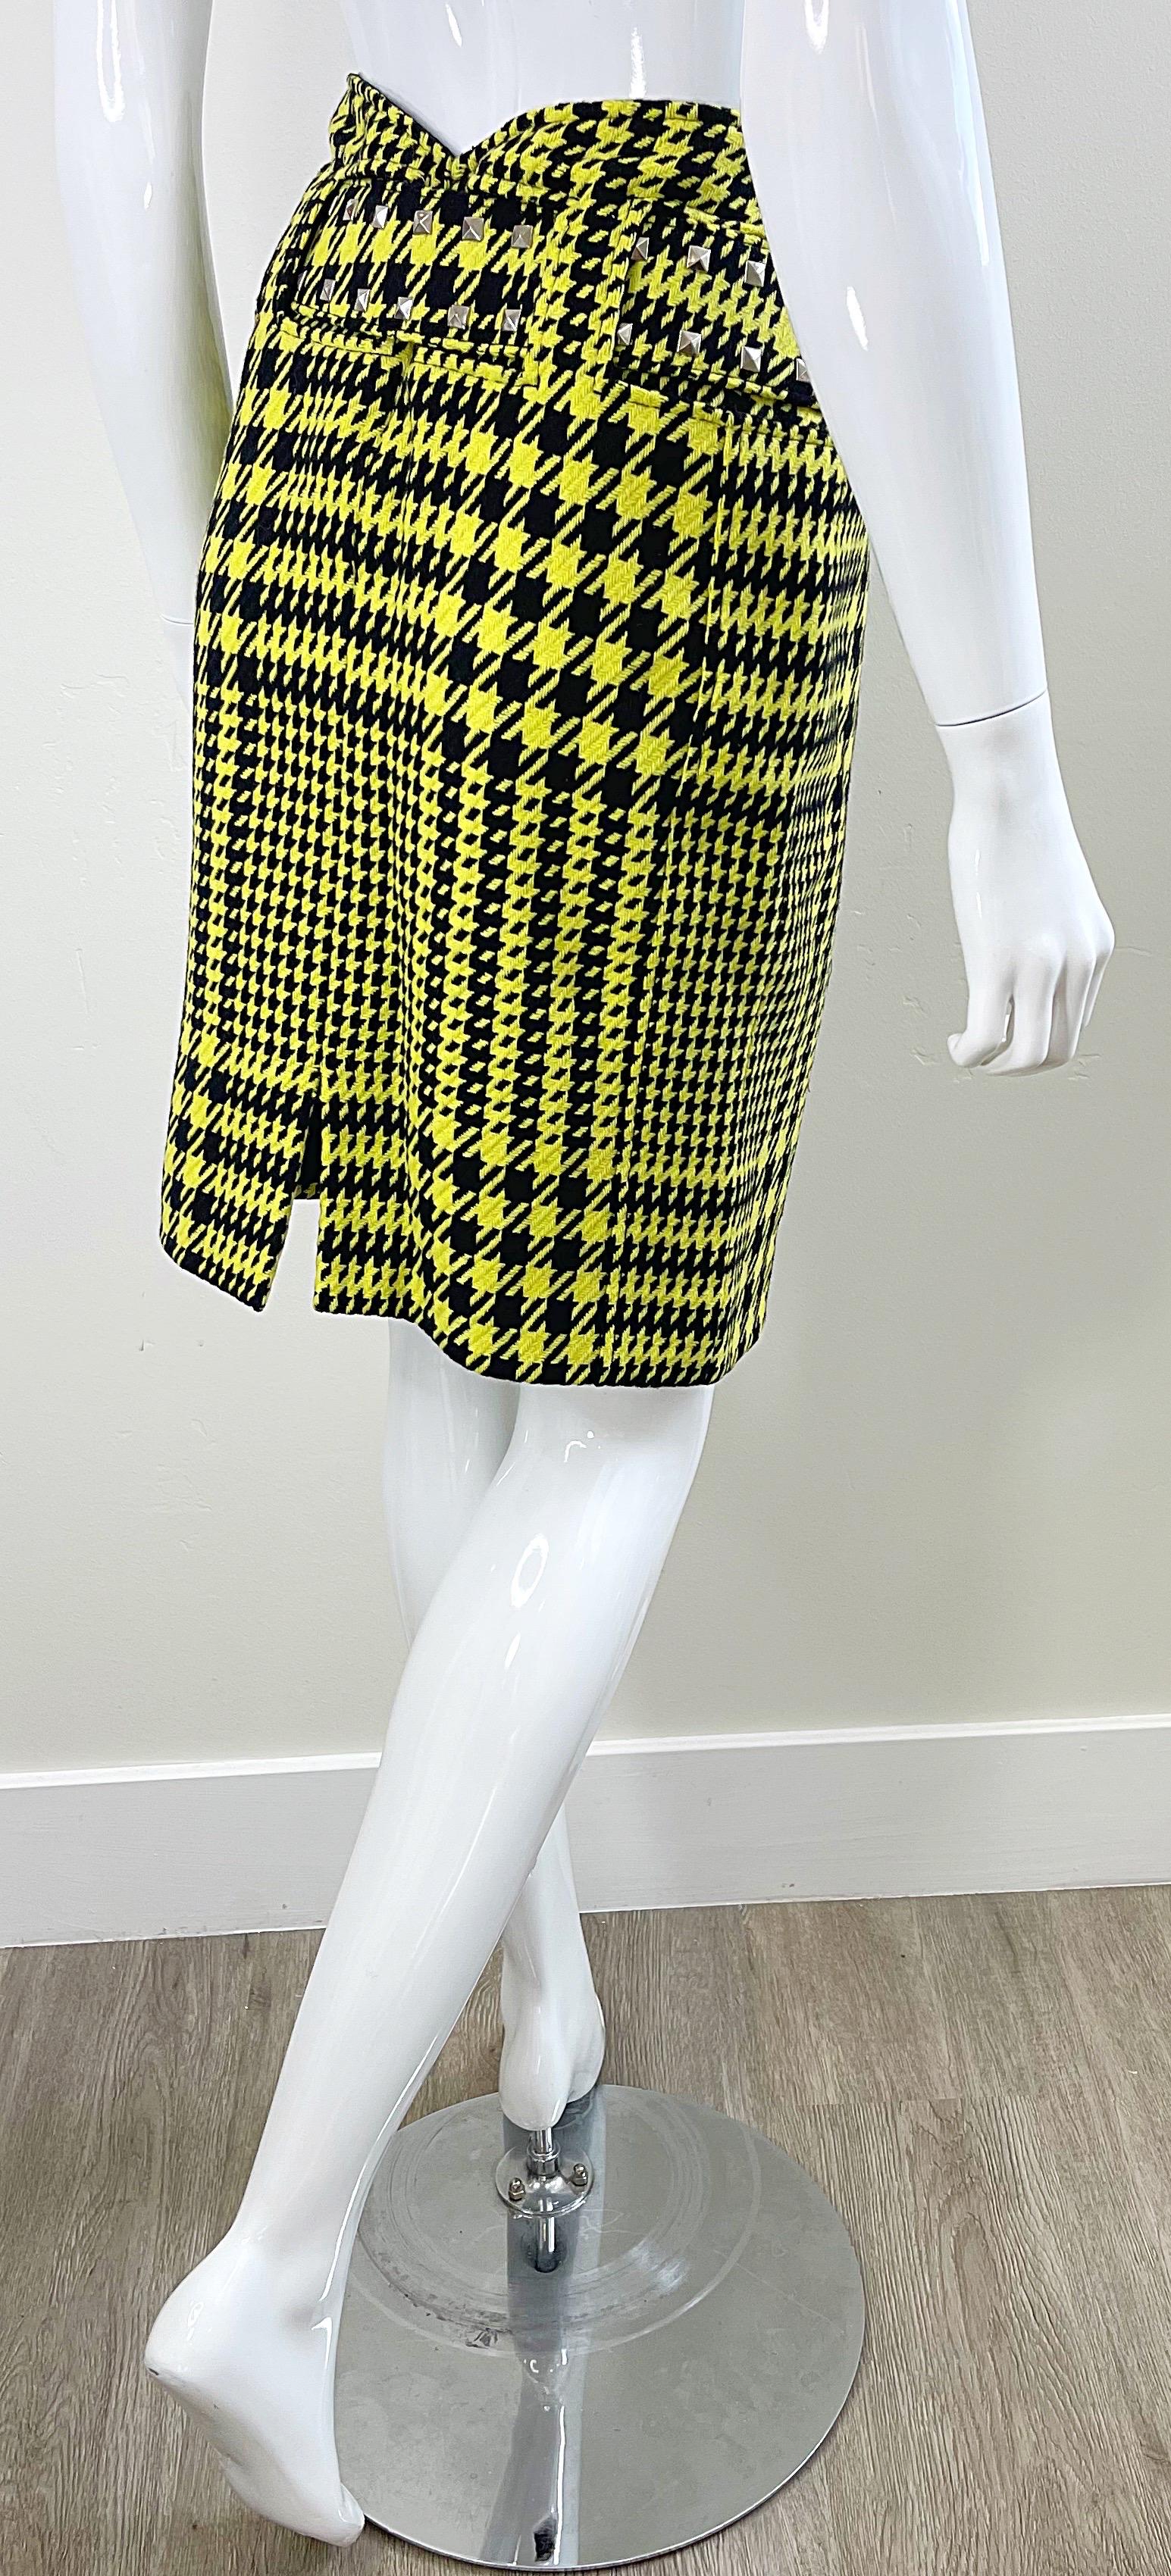 Gianni Versace Fall 2004 Runway Size 8 Yellow Black Houndstooth Belted Skirt For Sale 8